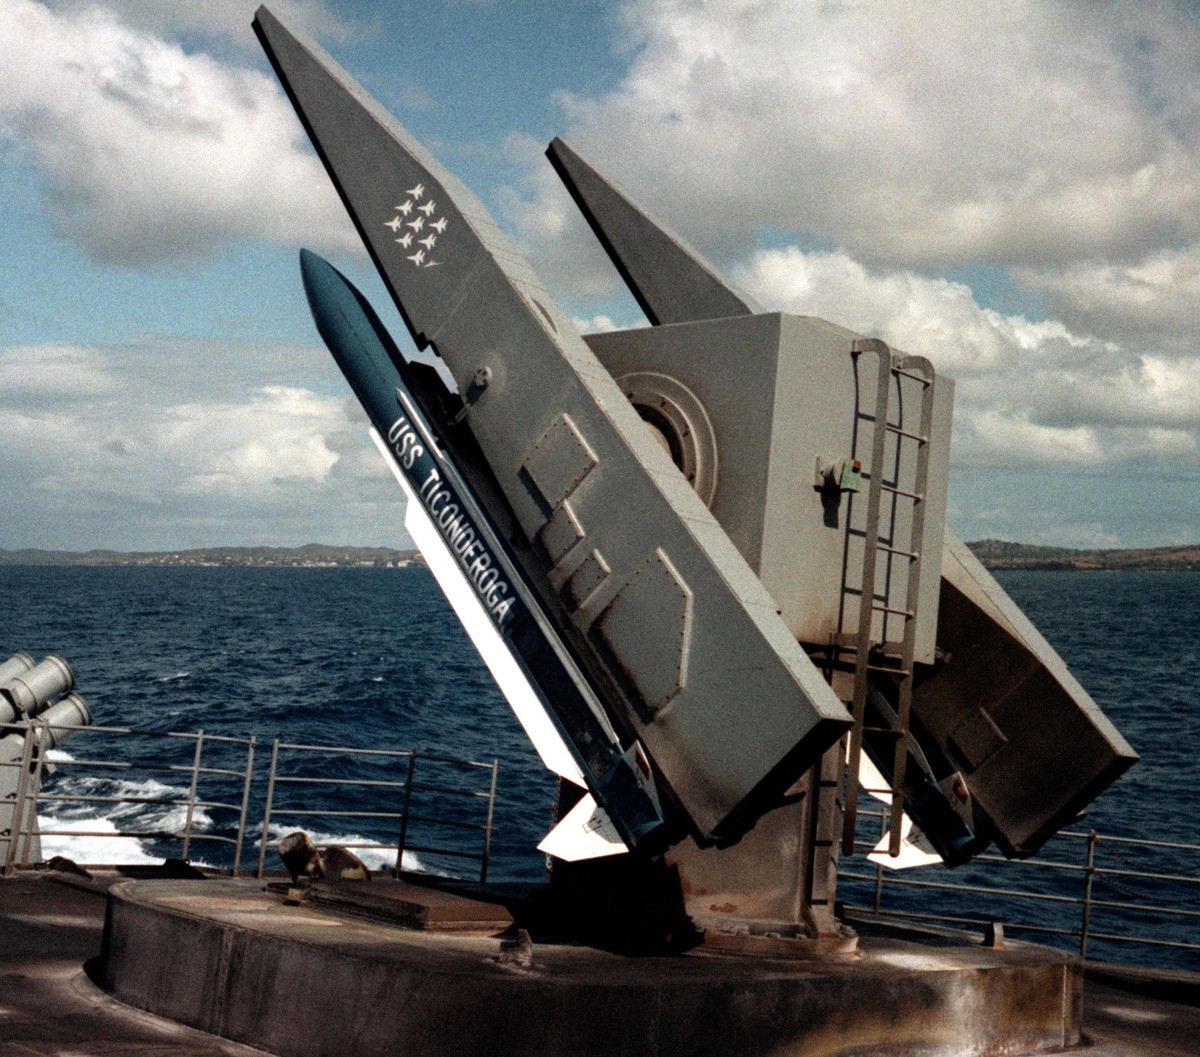 https://www.seaforces.org/wpnsys/SURFACE/Mk-26-GMLS_DAT/Mk-26-missile-launcher-003.jpg